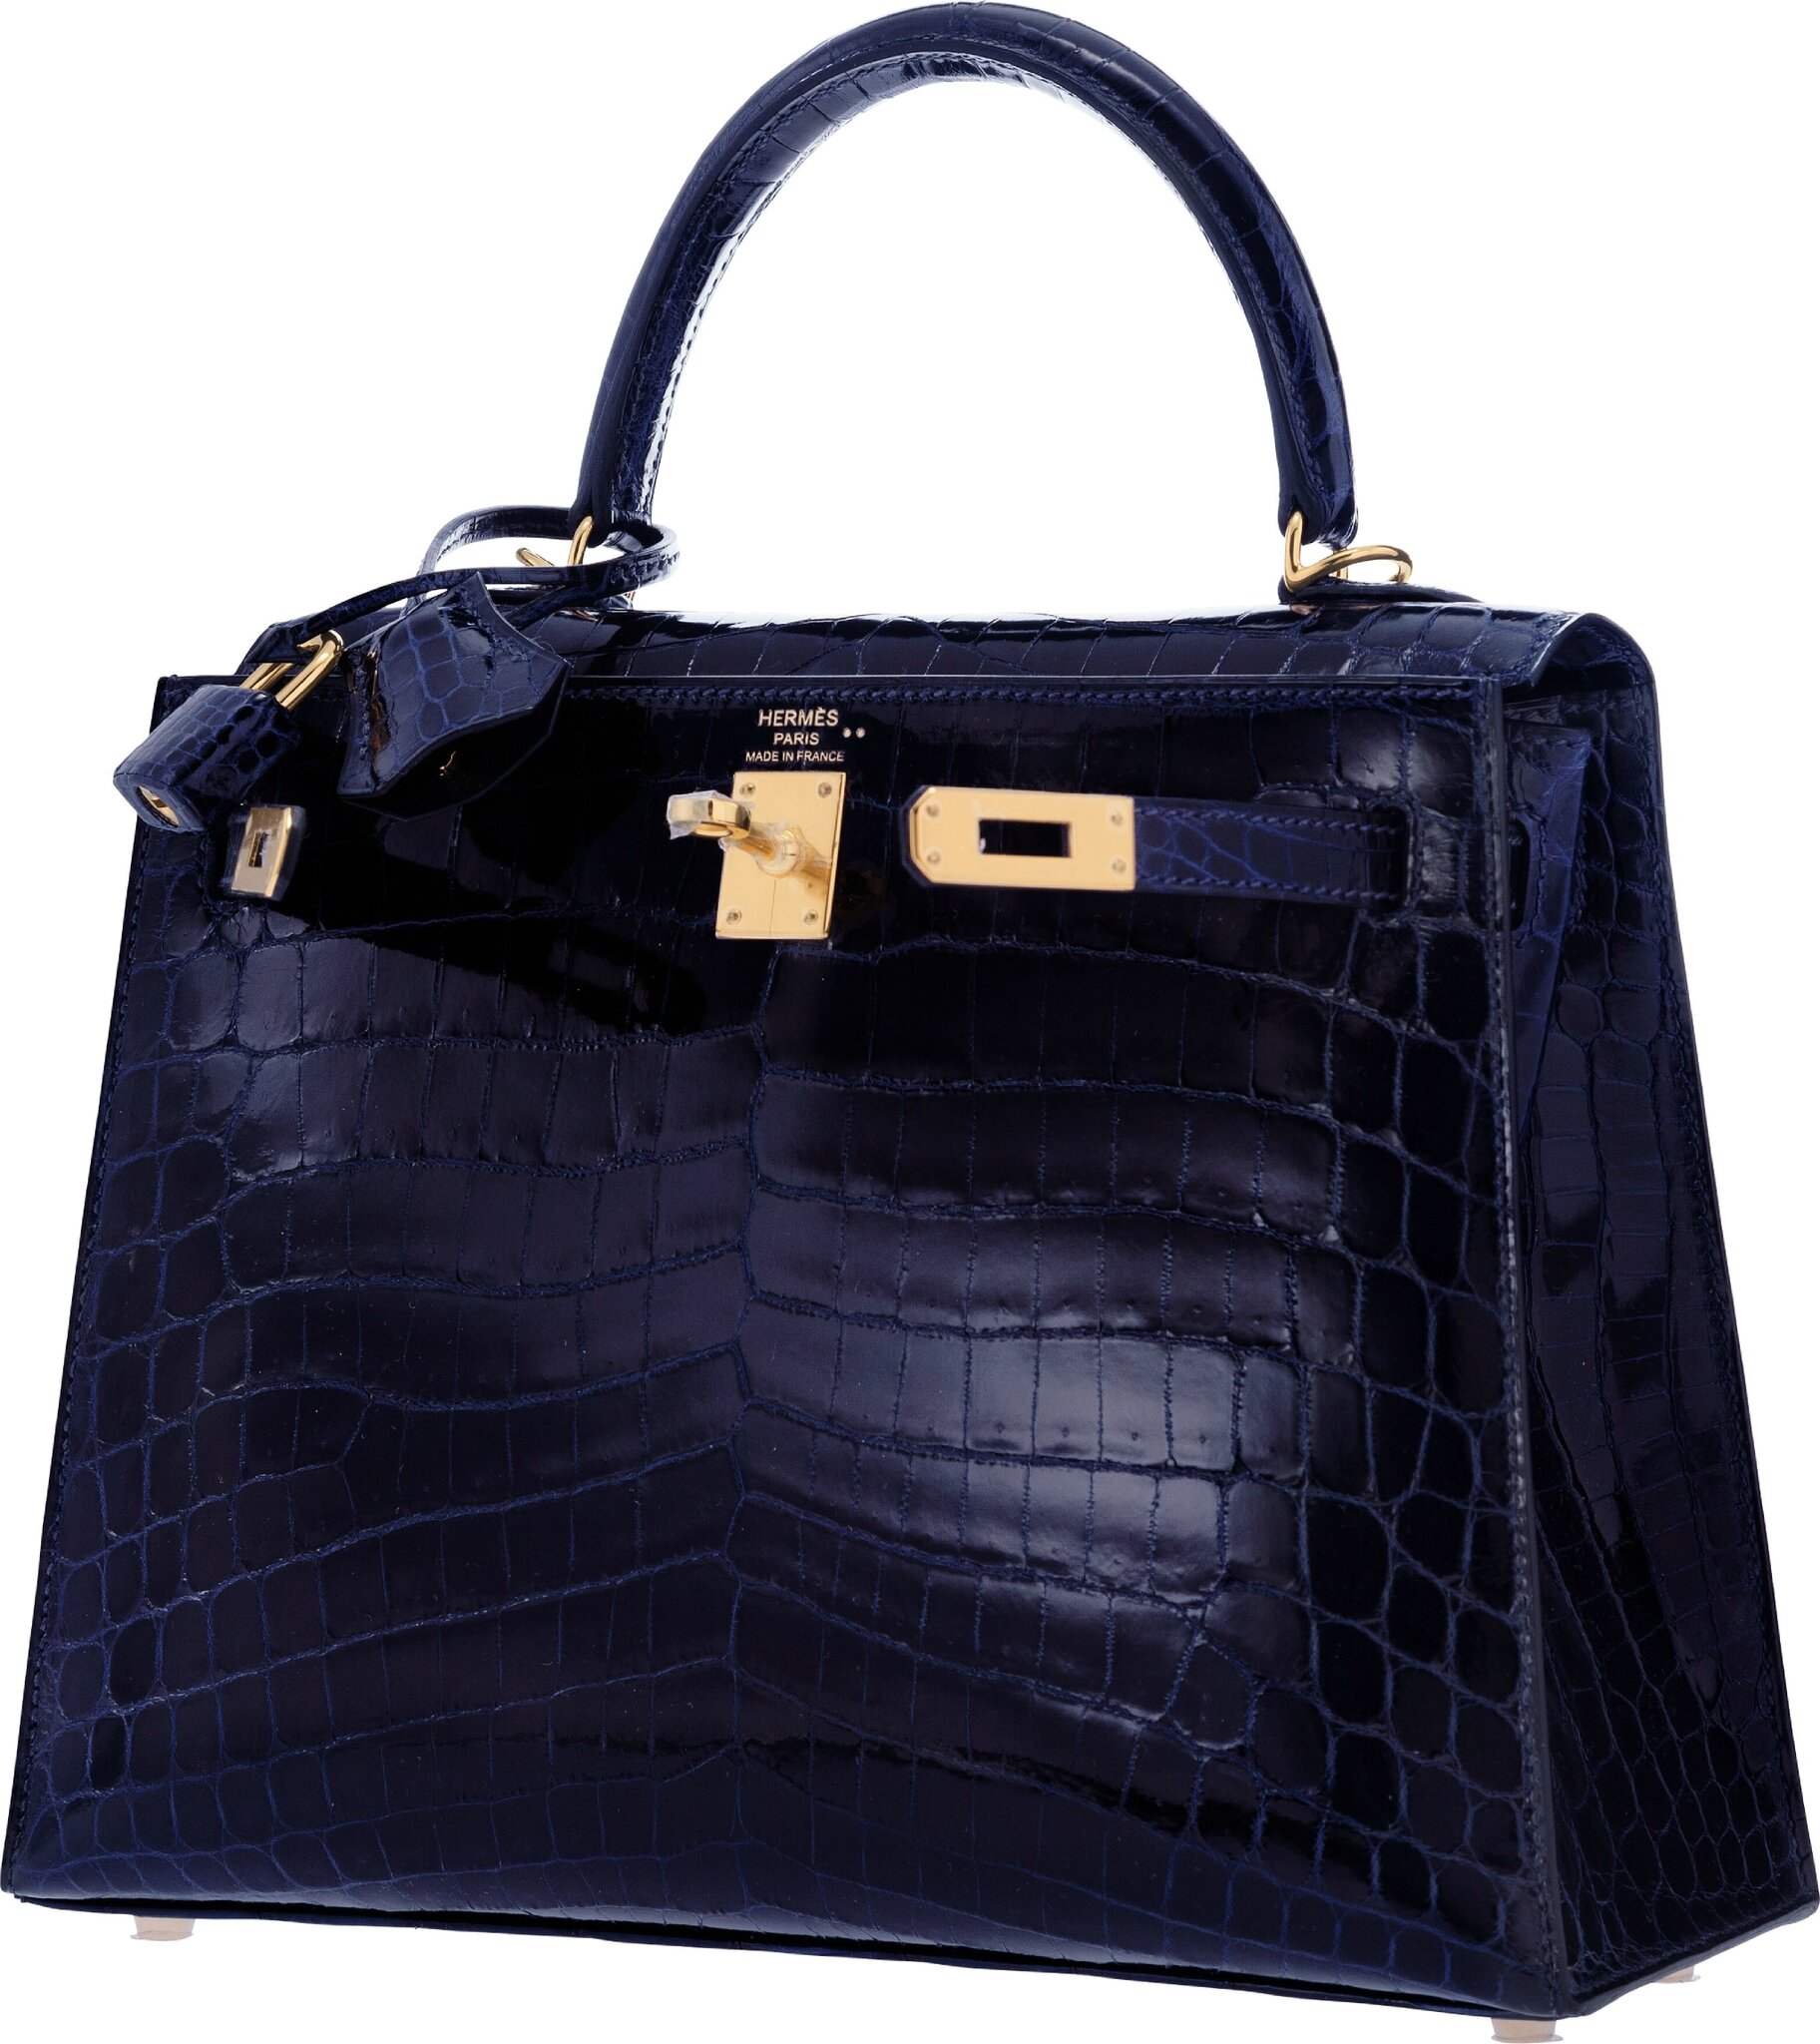 BRAND NEW HOLY GRAIL EXOTIC HERMES KELLY BAG 25 cm HIMALAYAN CROC